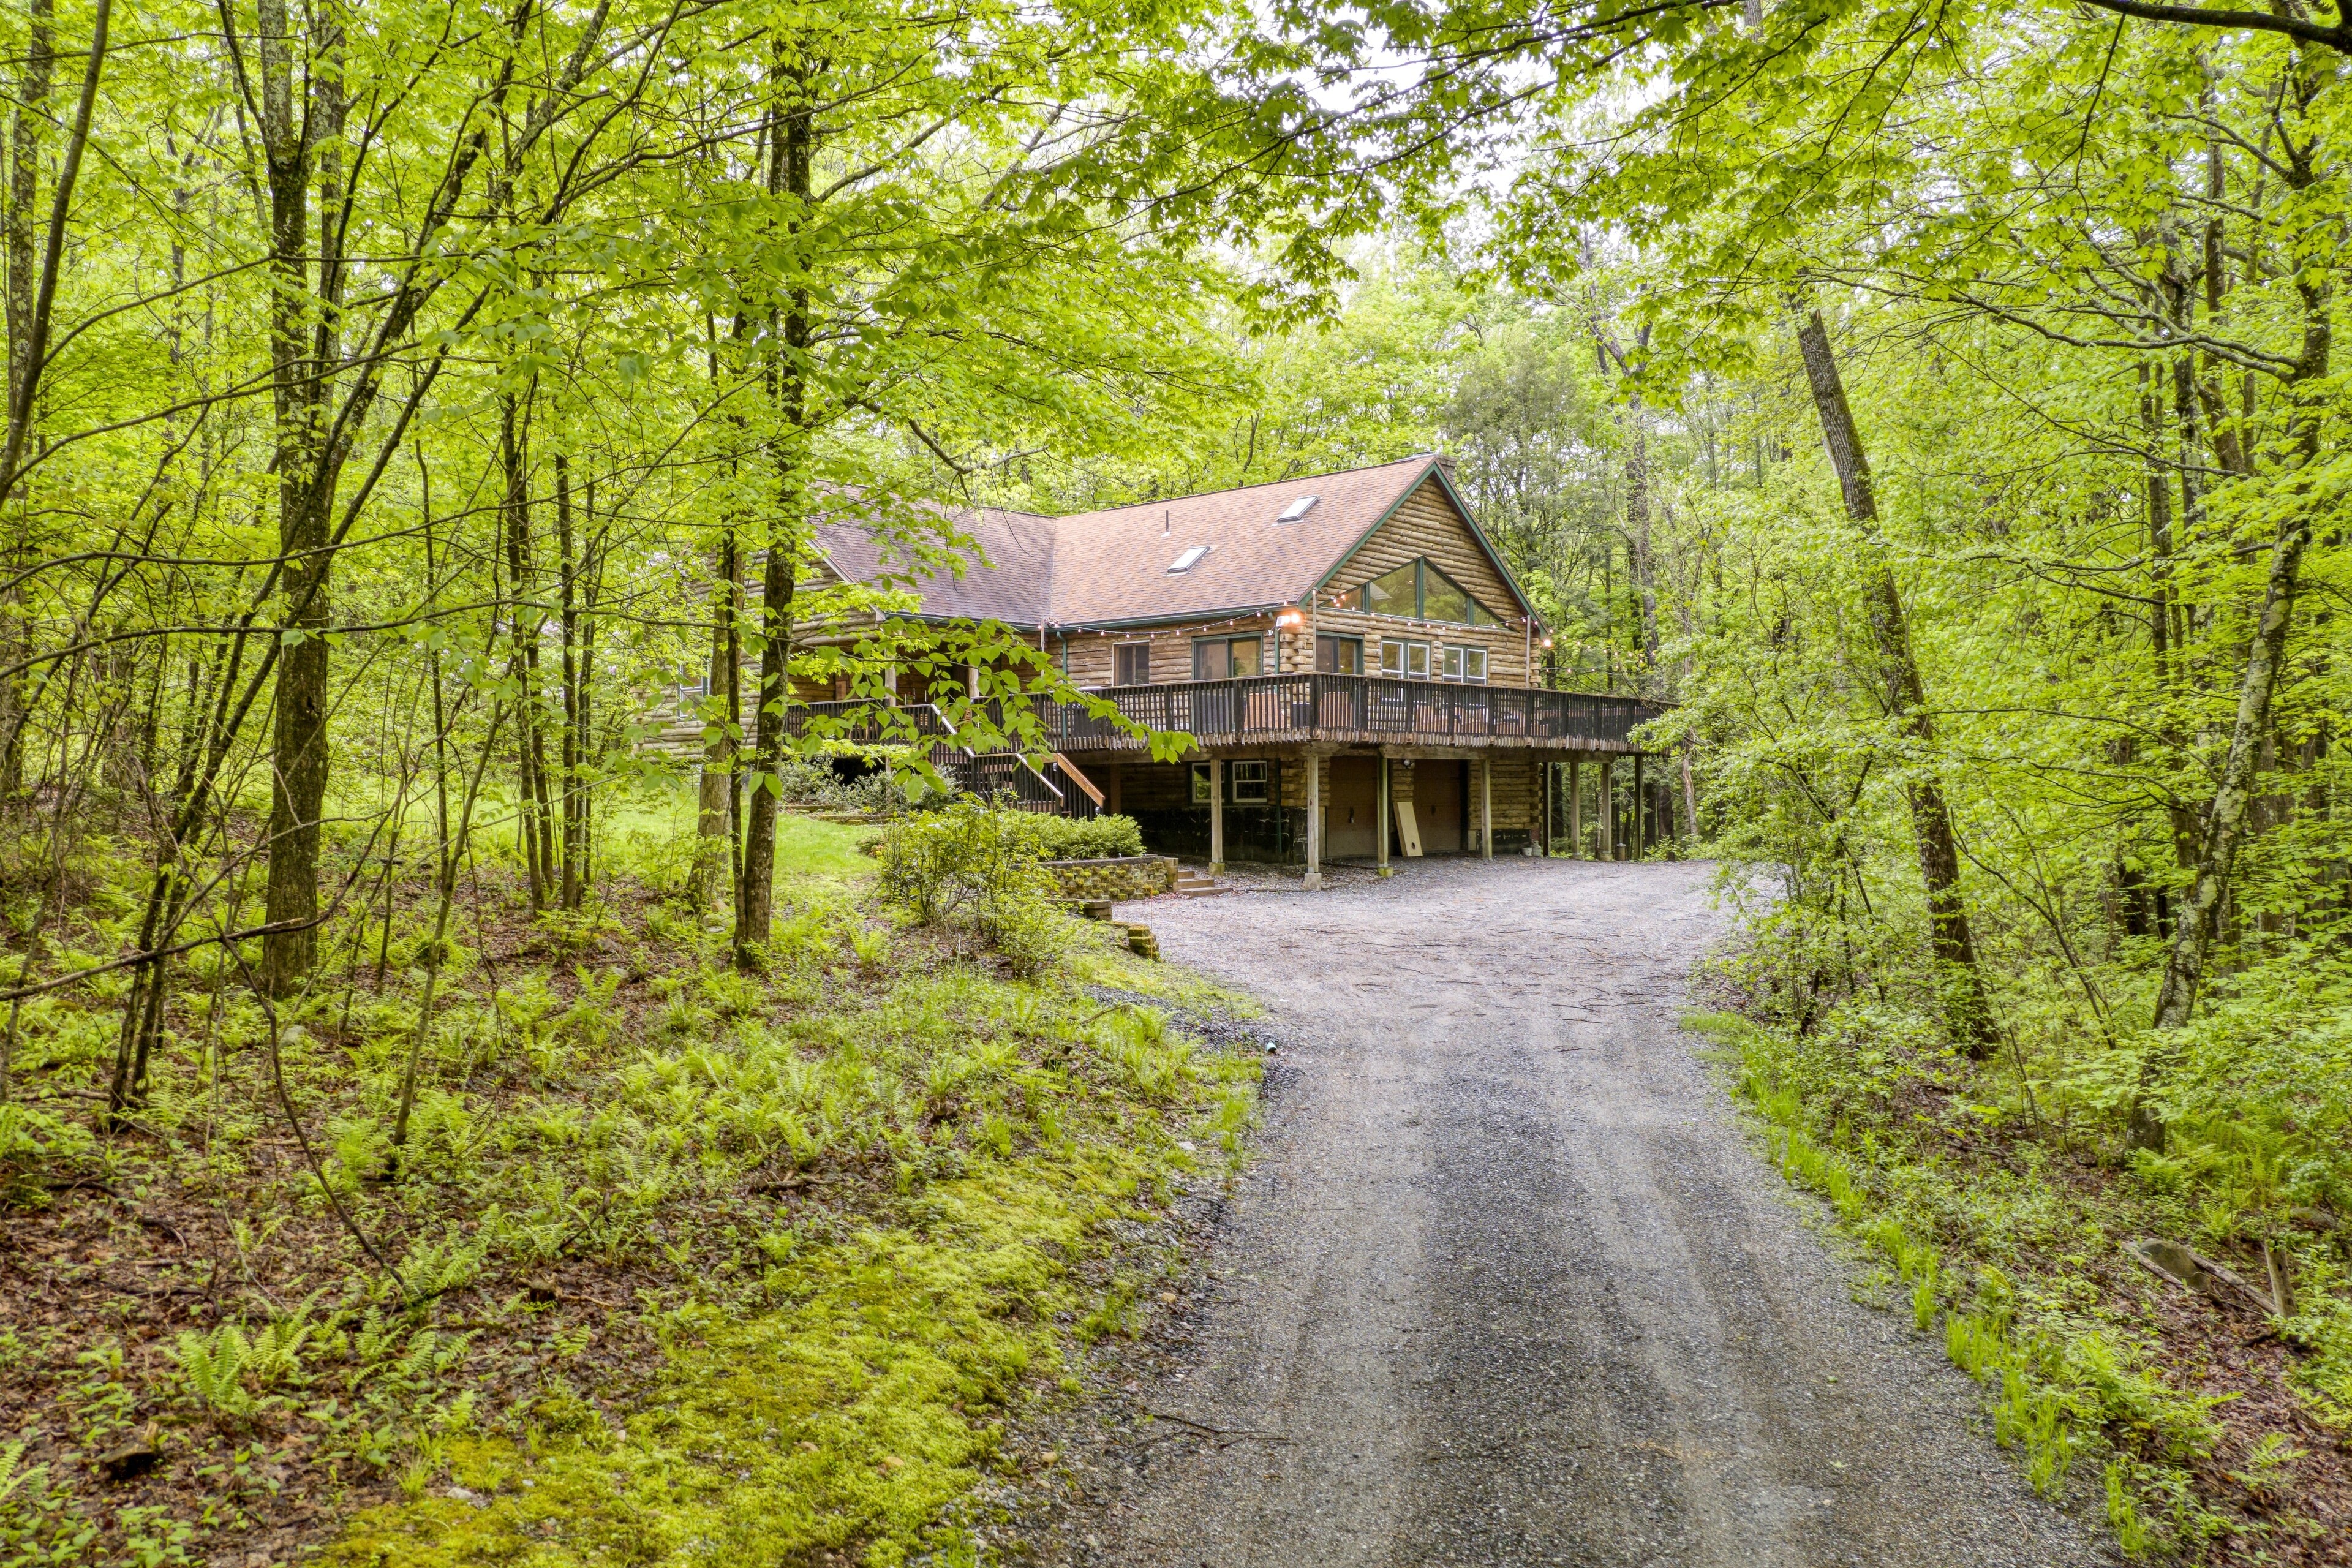 Enter your secluded Berkshire retreat.